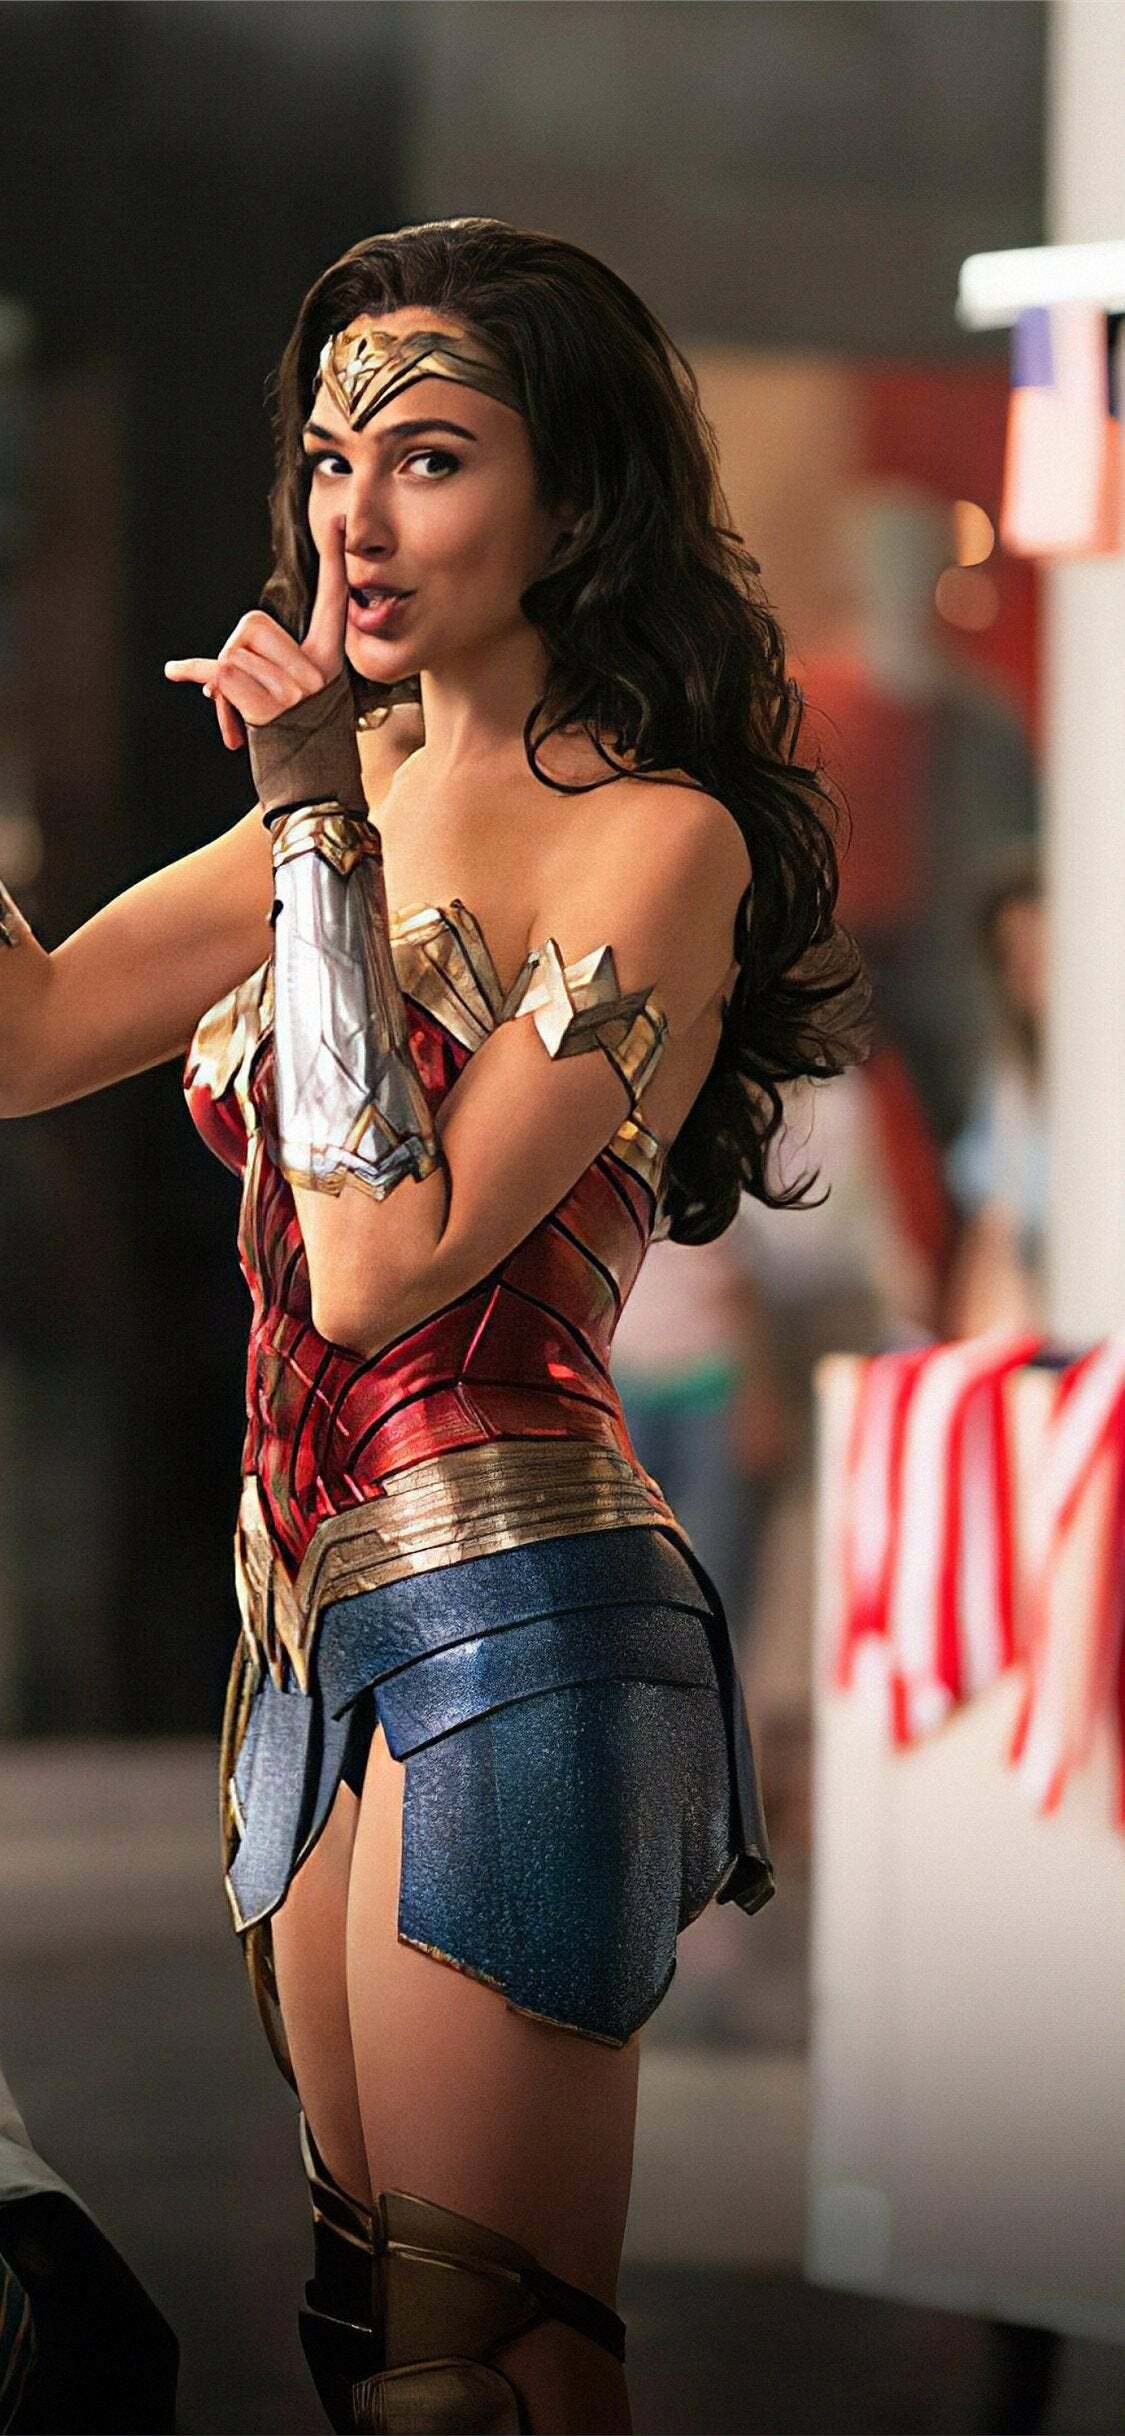 Love gal gadot expression (her body too)